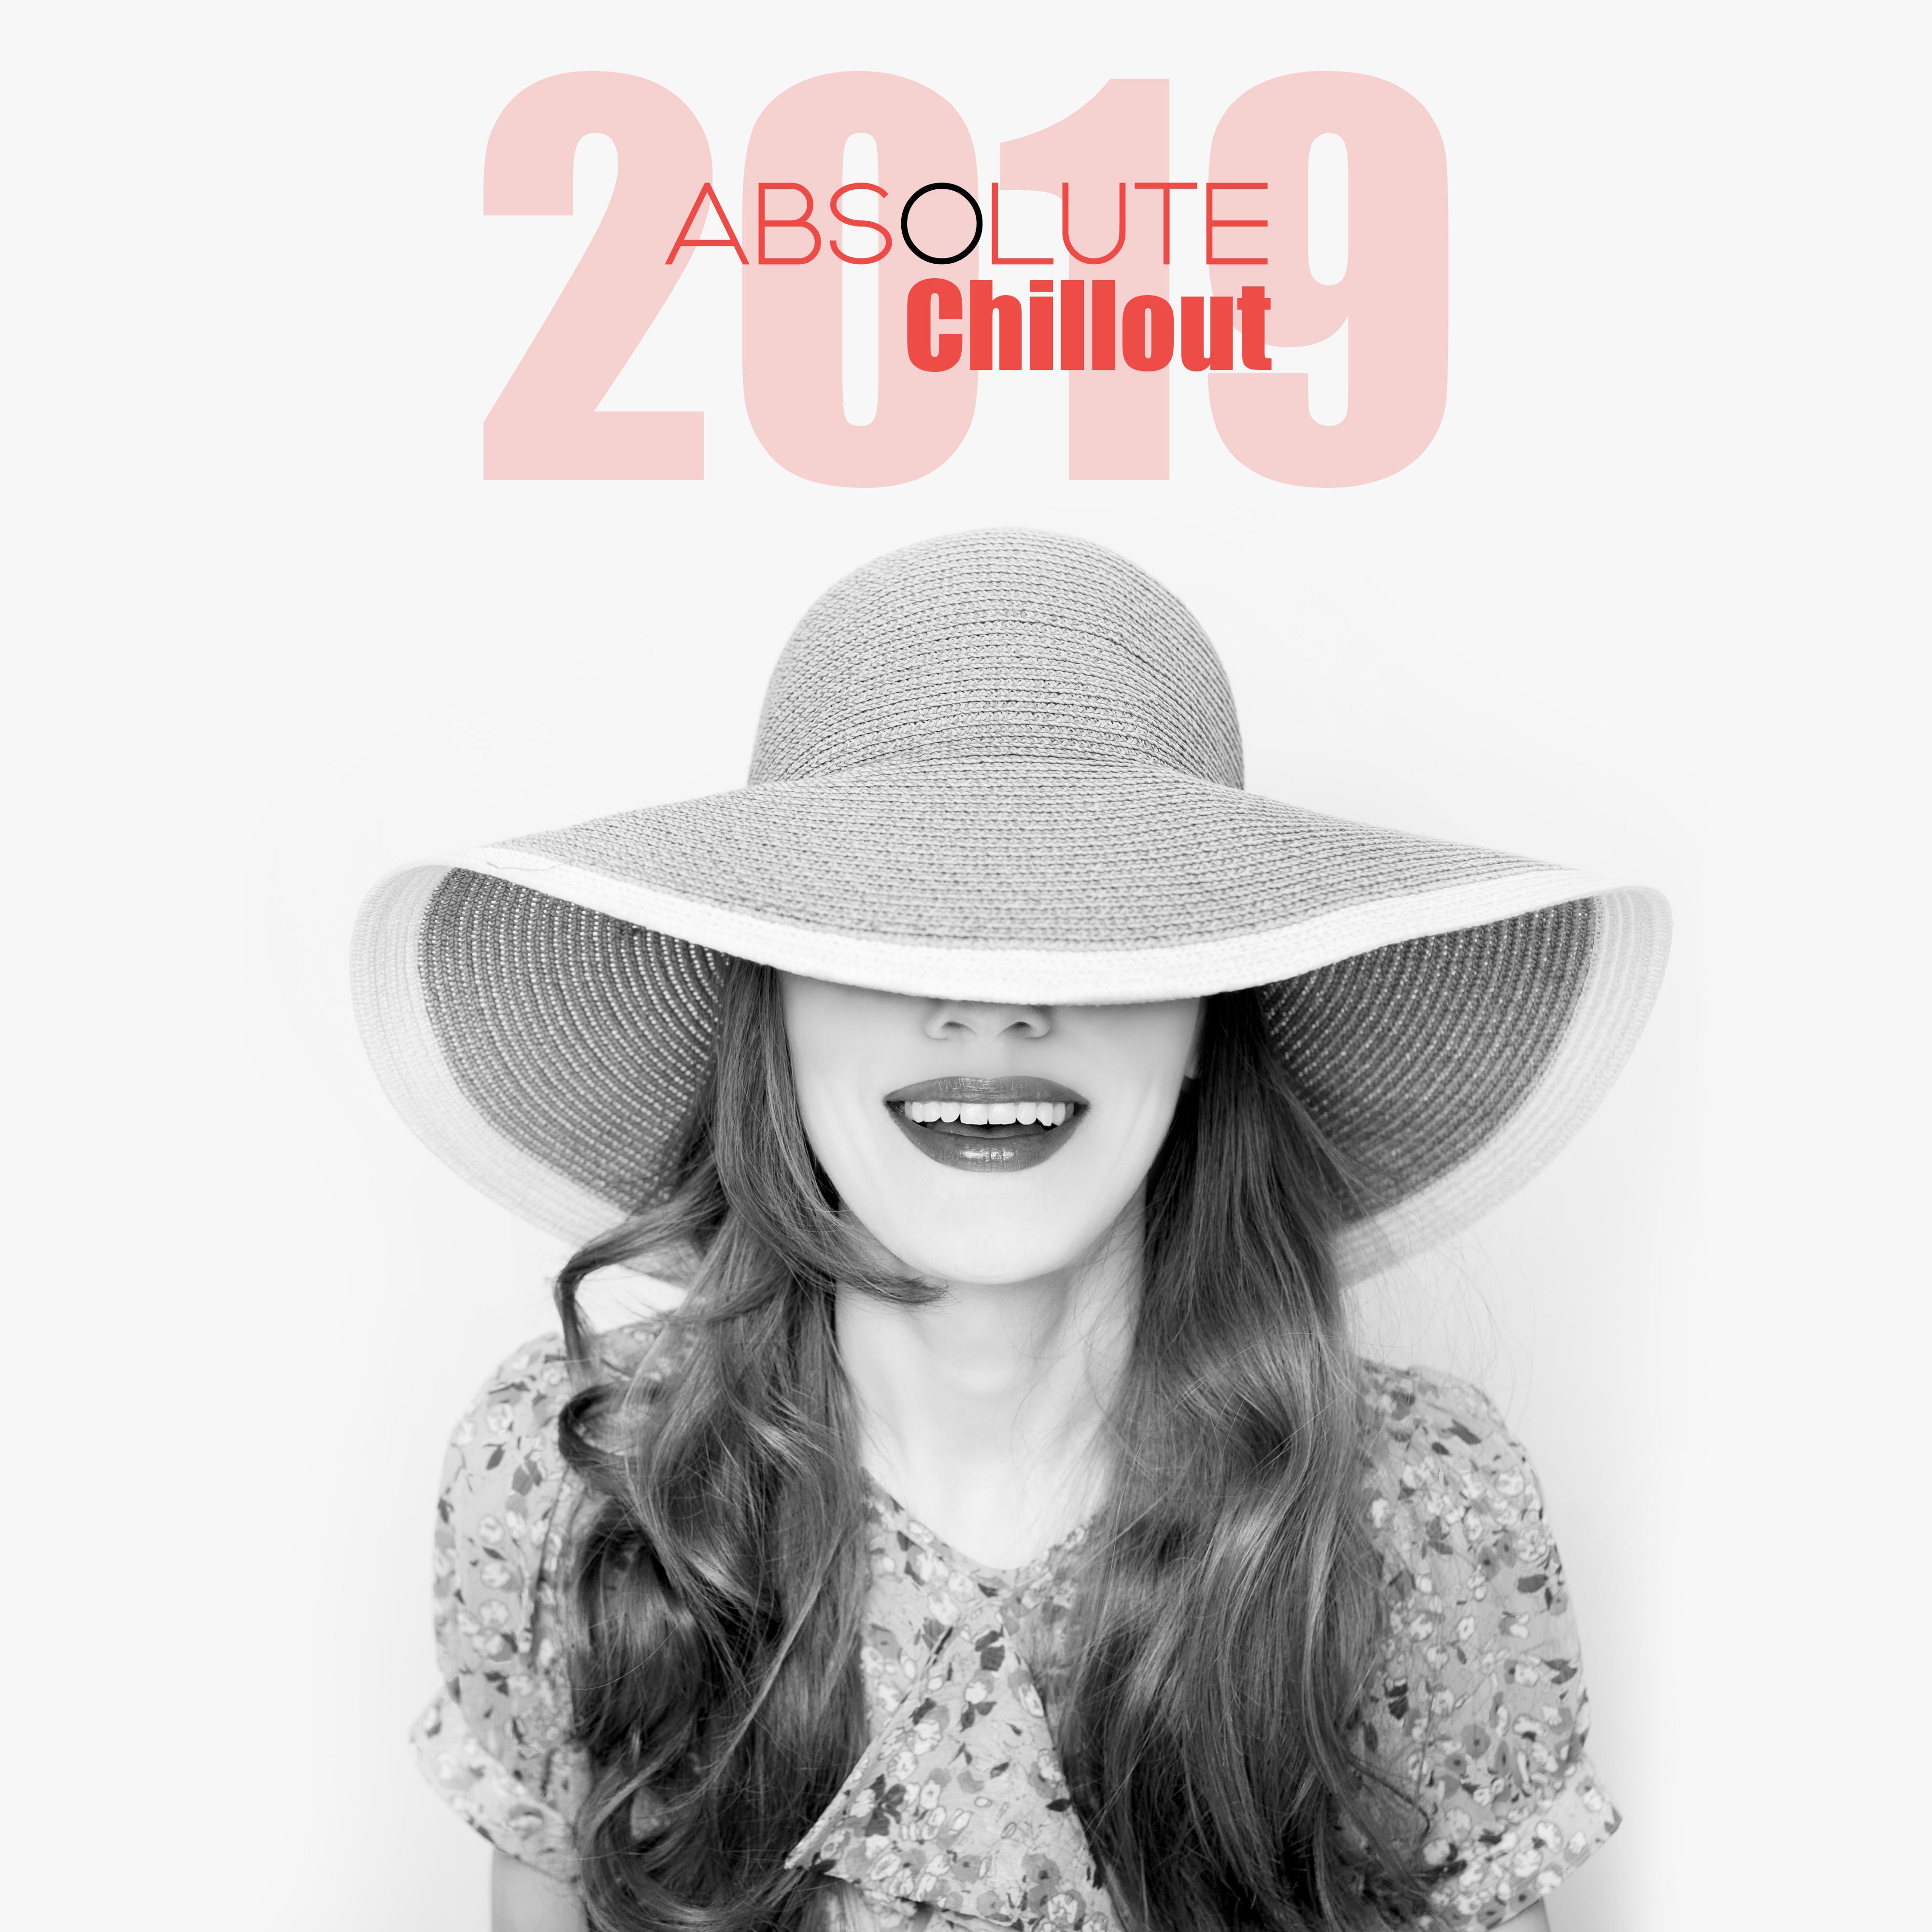 Absolute Chillout 2019: Super Mix 2019, Ibiza Dance Party, Summer Music 2019, Tropical Lounge Collection, Party Hits 2019